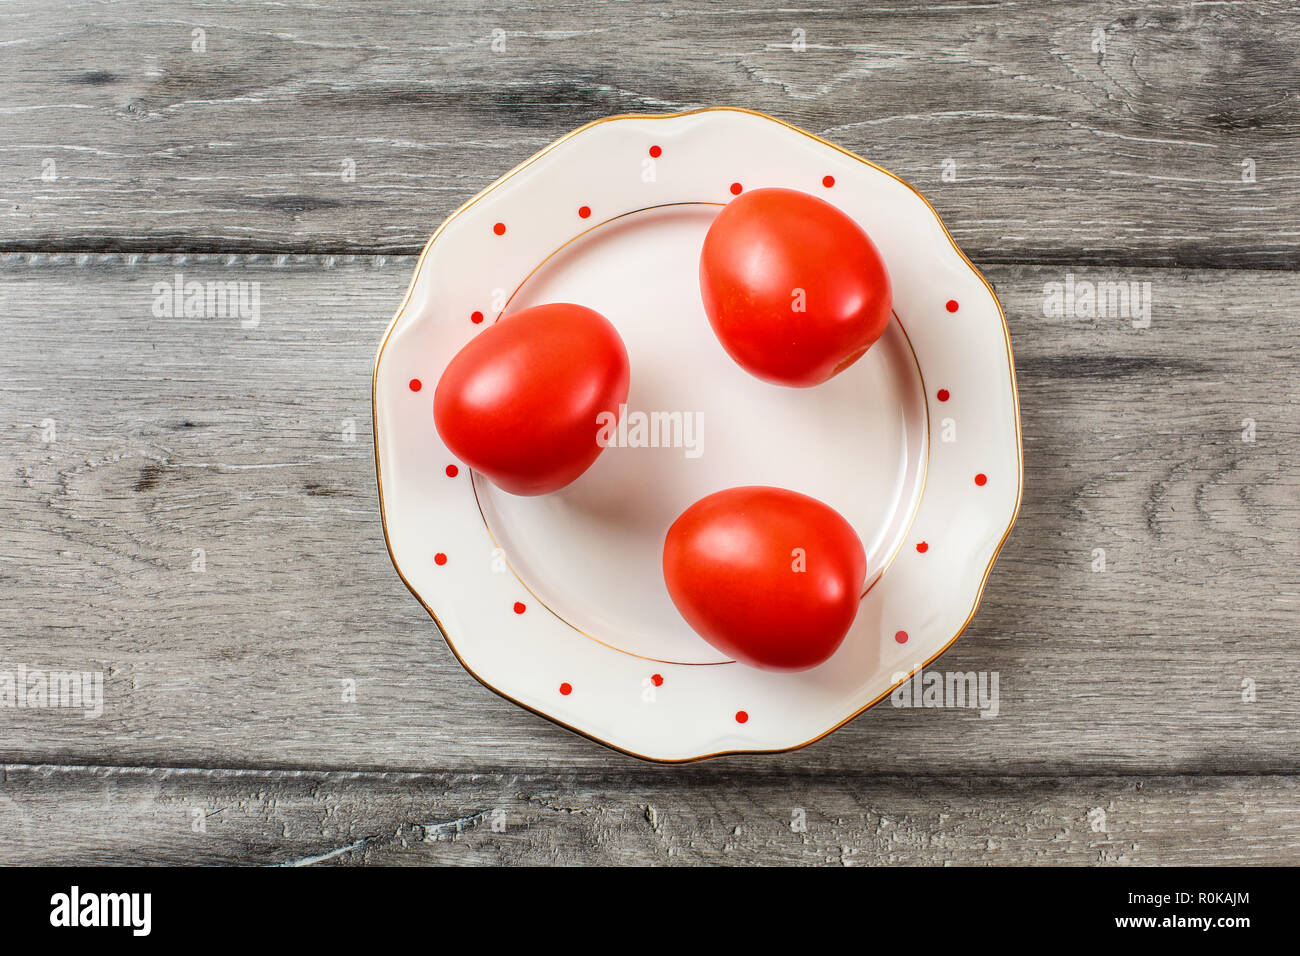 Three whole tomatoes on white plate with small red dots and golden rim, gray wooden desk, tabletop view. Stock Photo